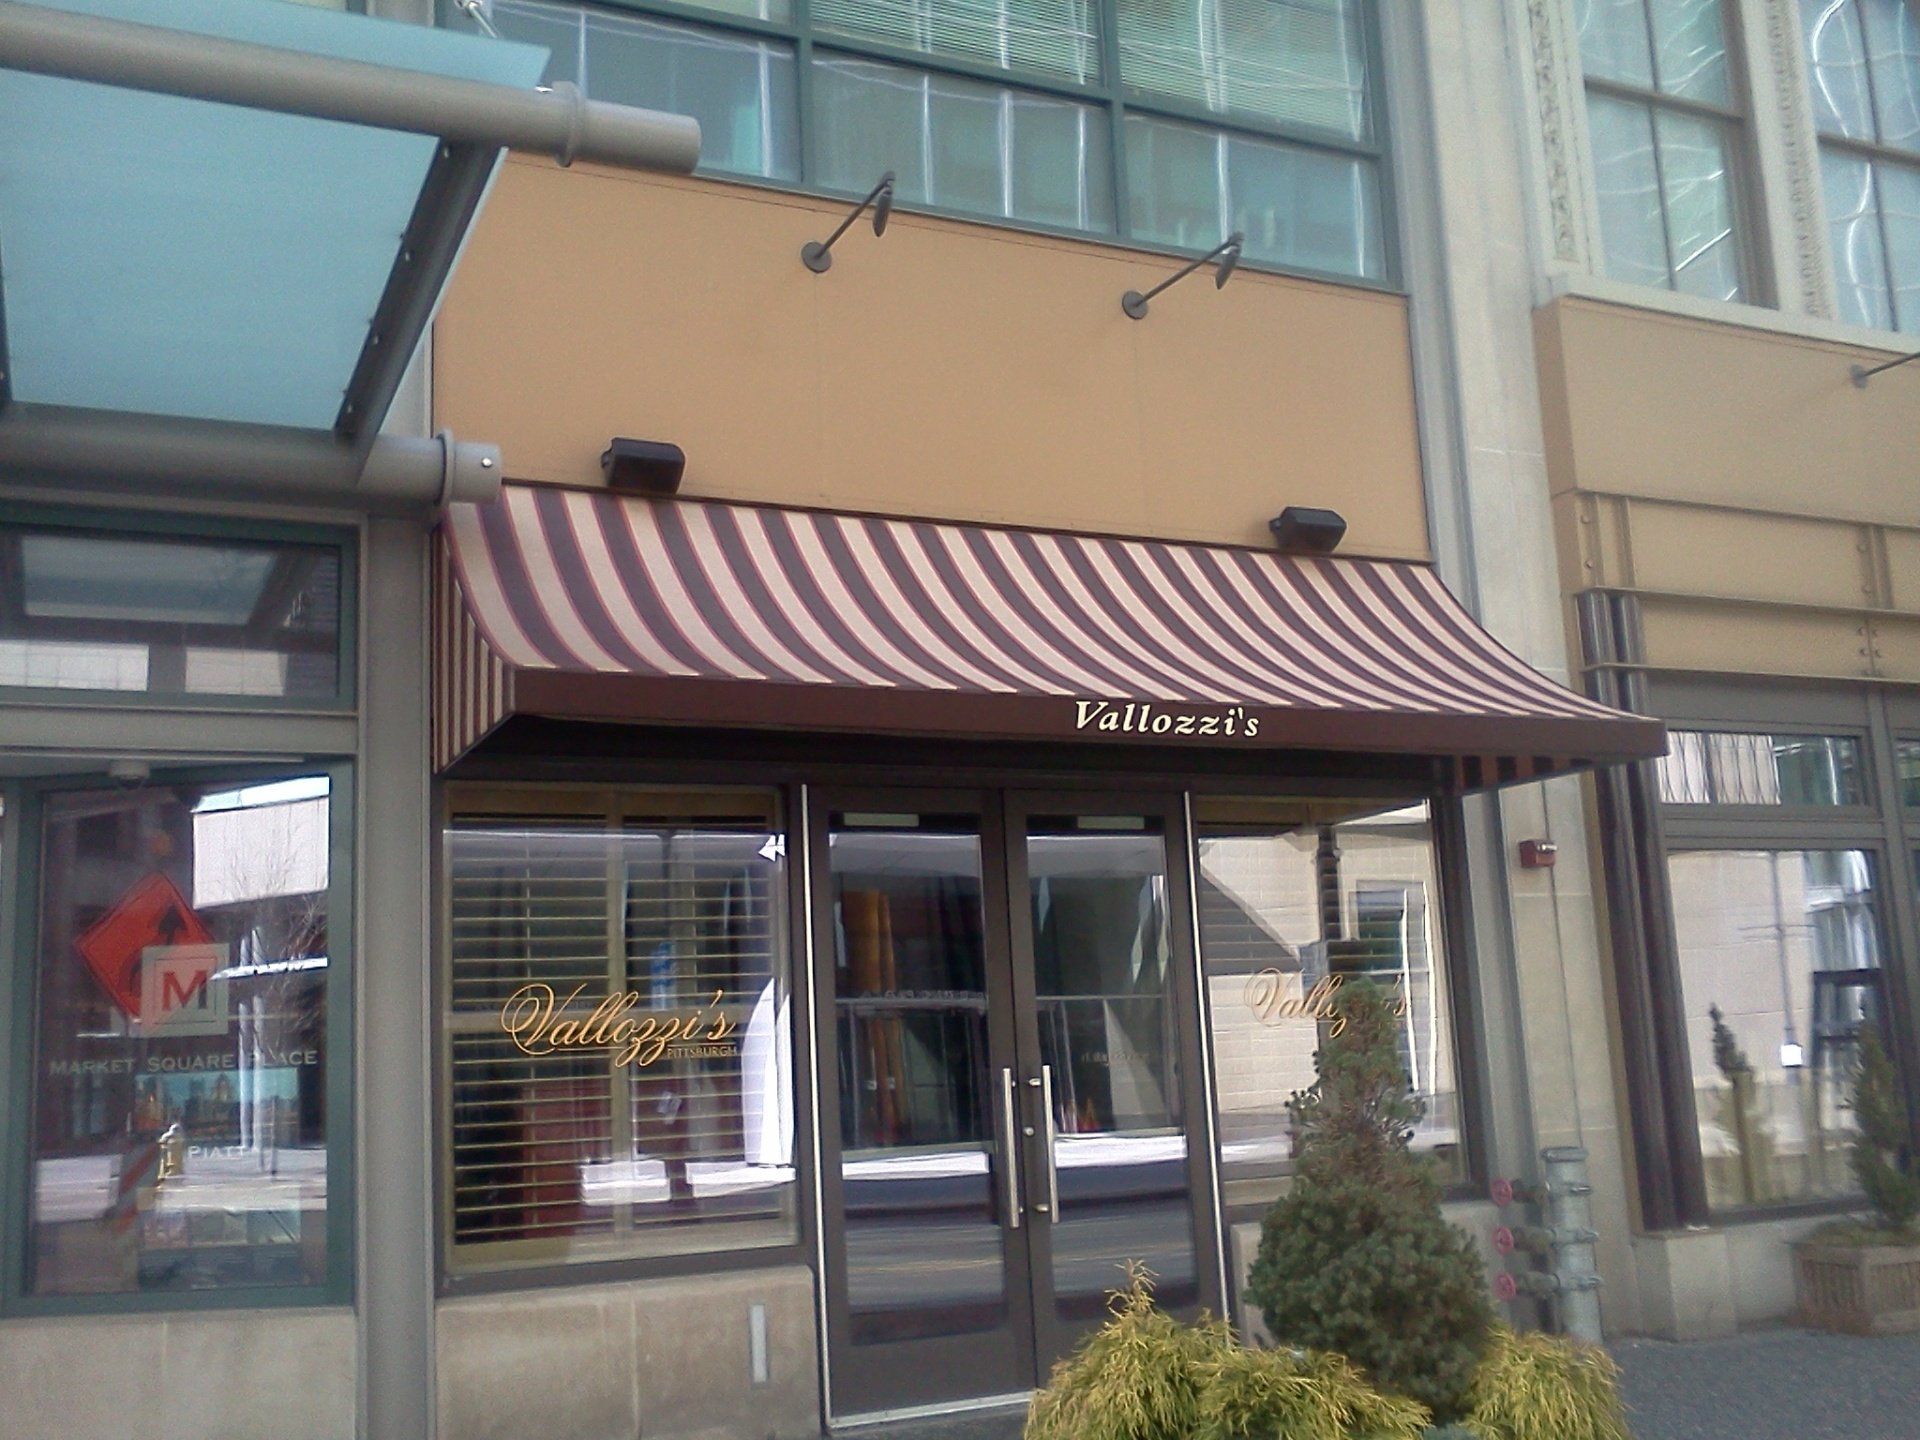 Commercial awning-12 — Custom awnings in Pittsburgh, PA